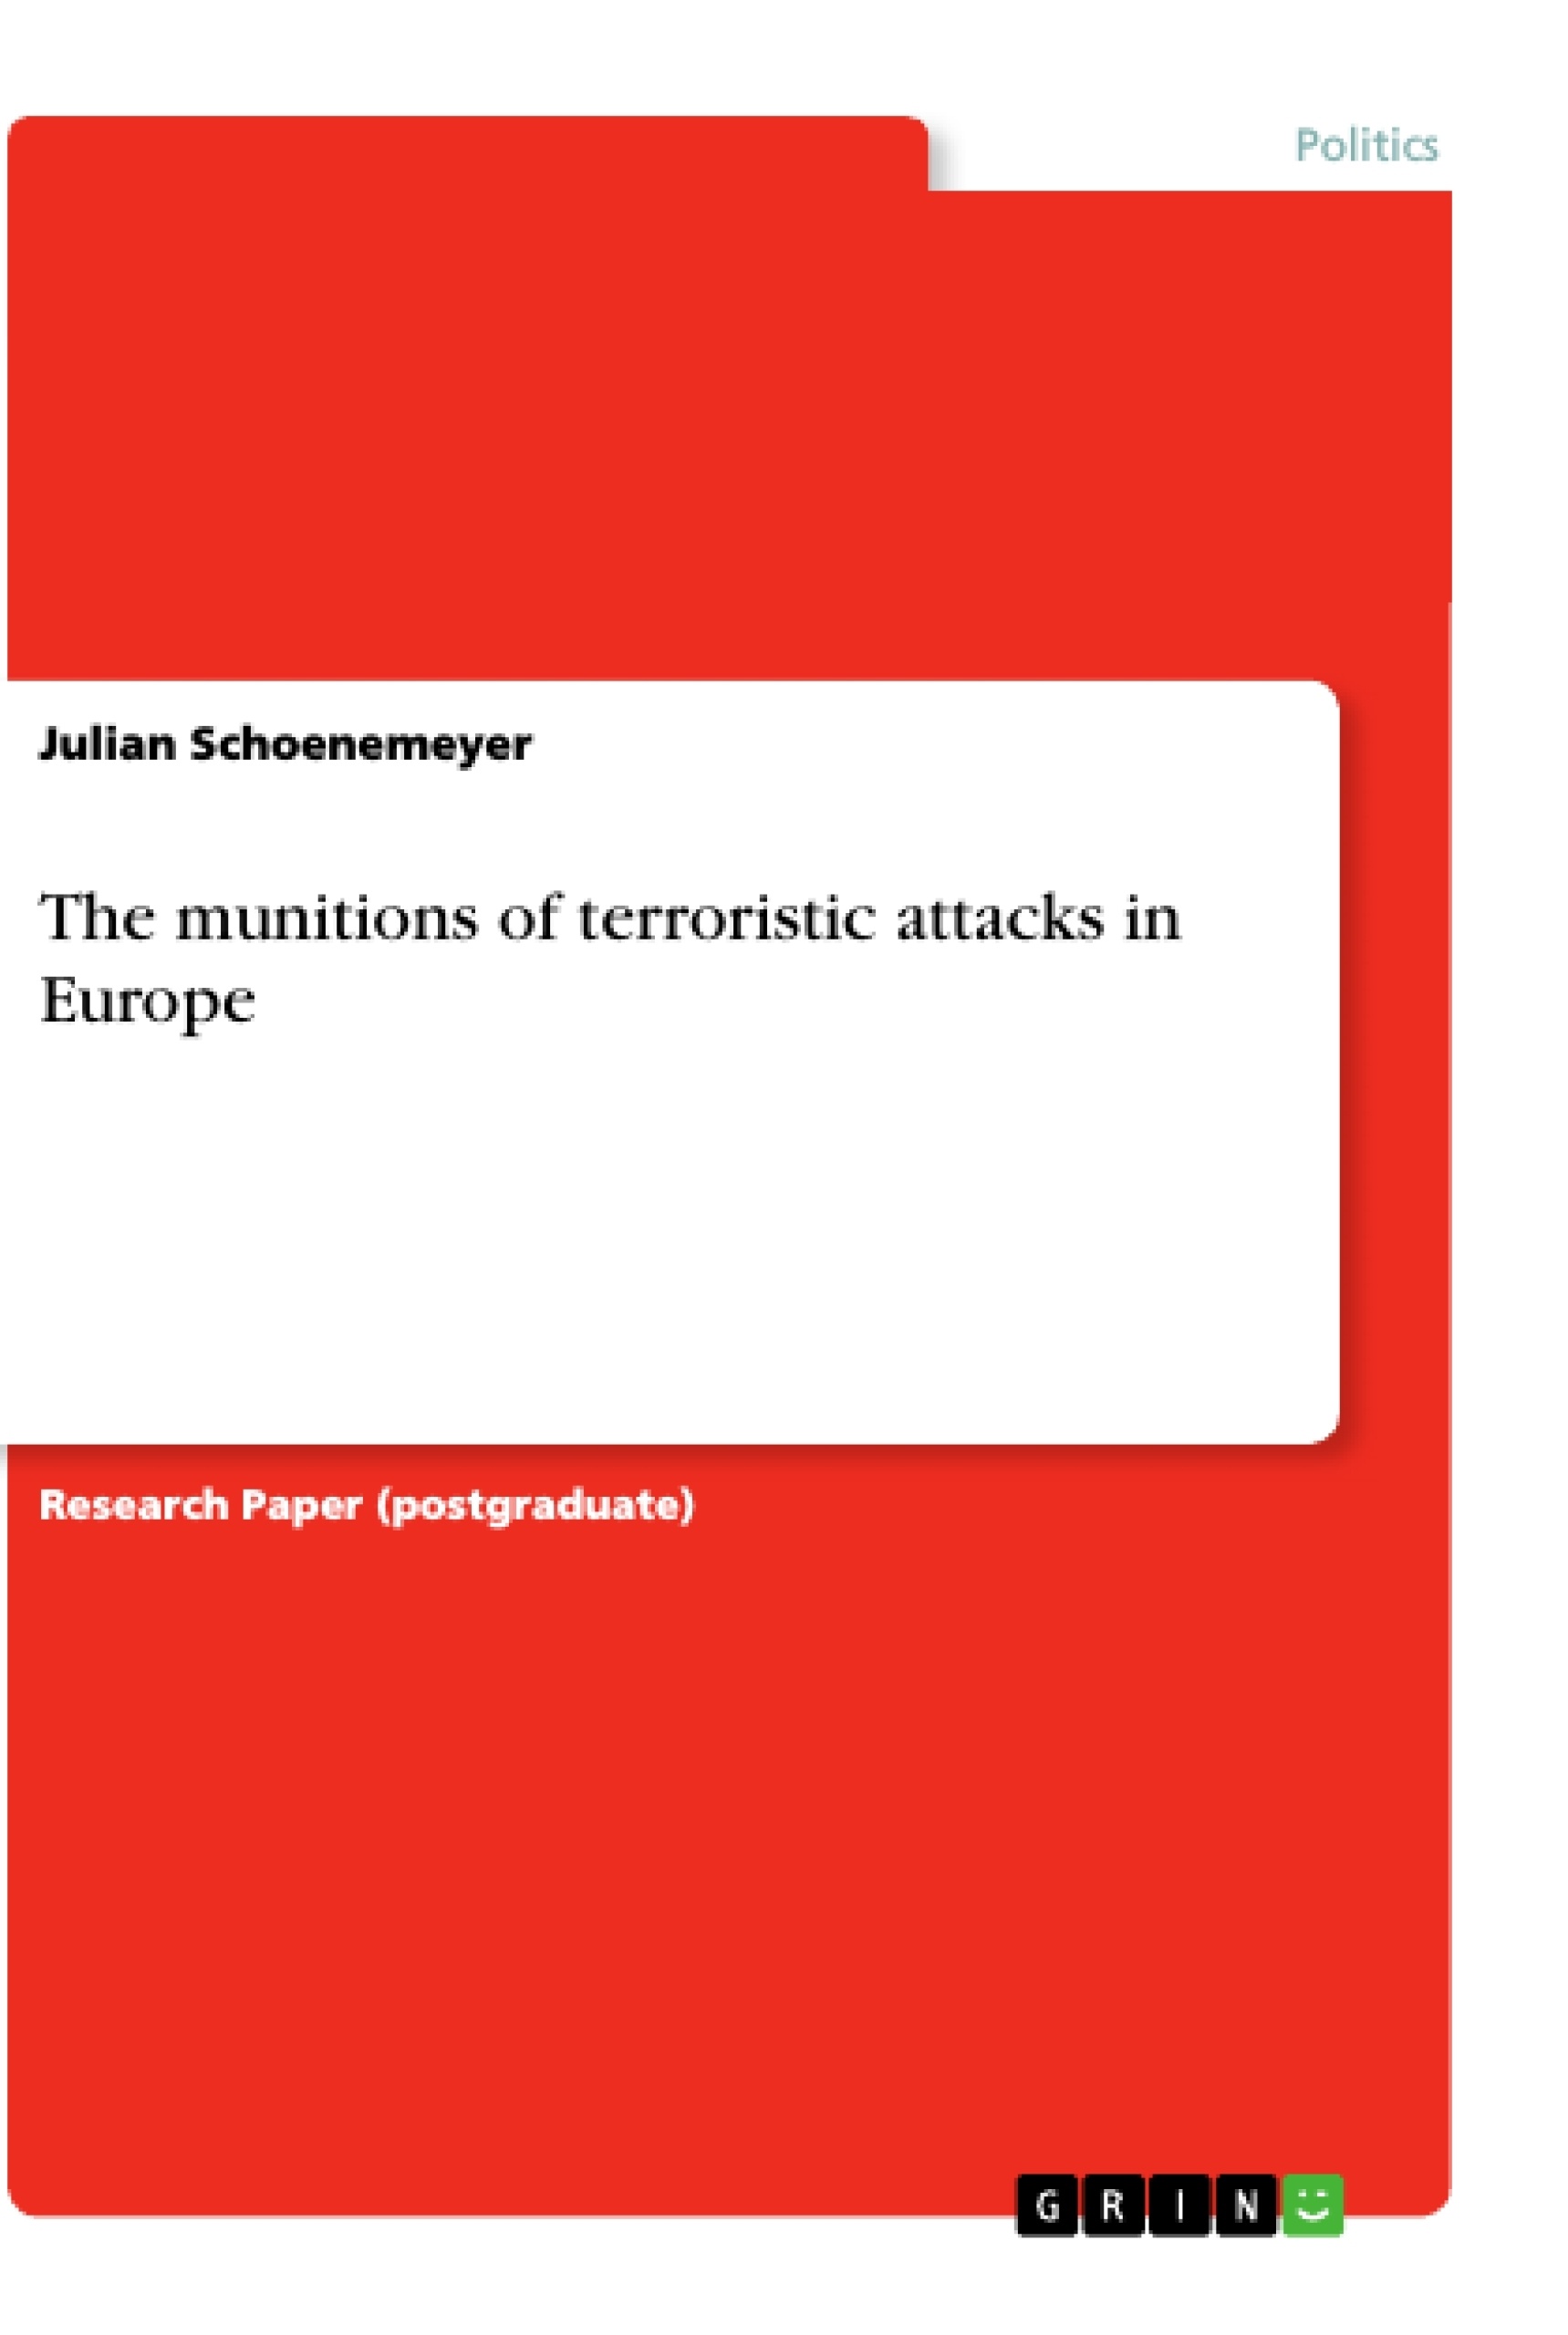 Título: The munitions of terroristic attacks in Europe